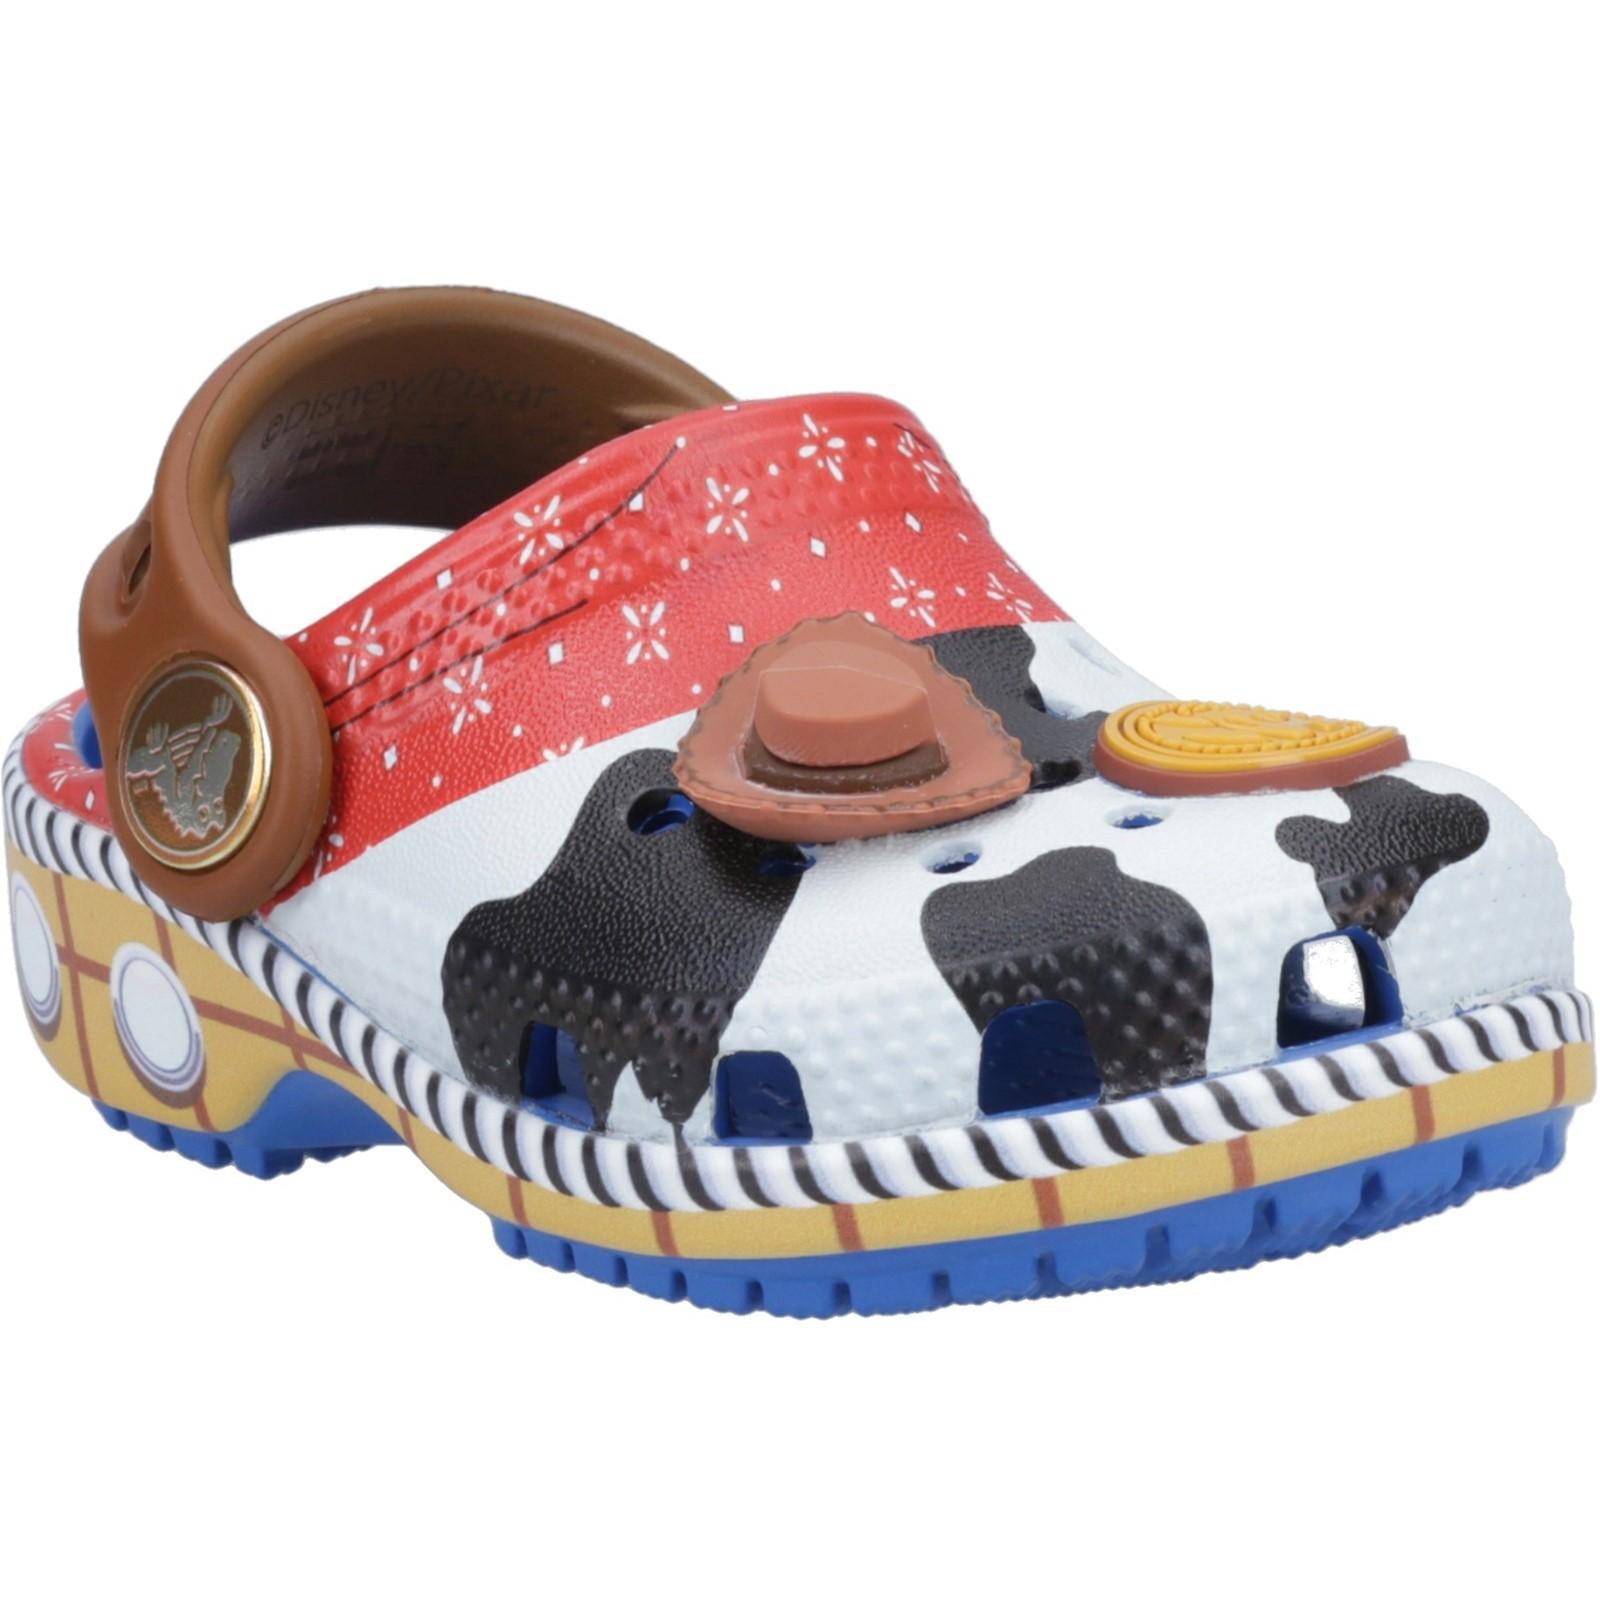 Crocs Toy Story Woody Classic Clog Shoes